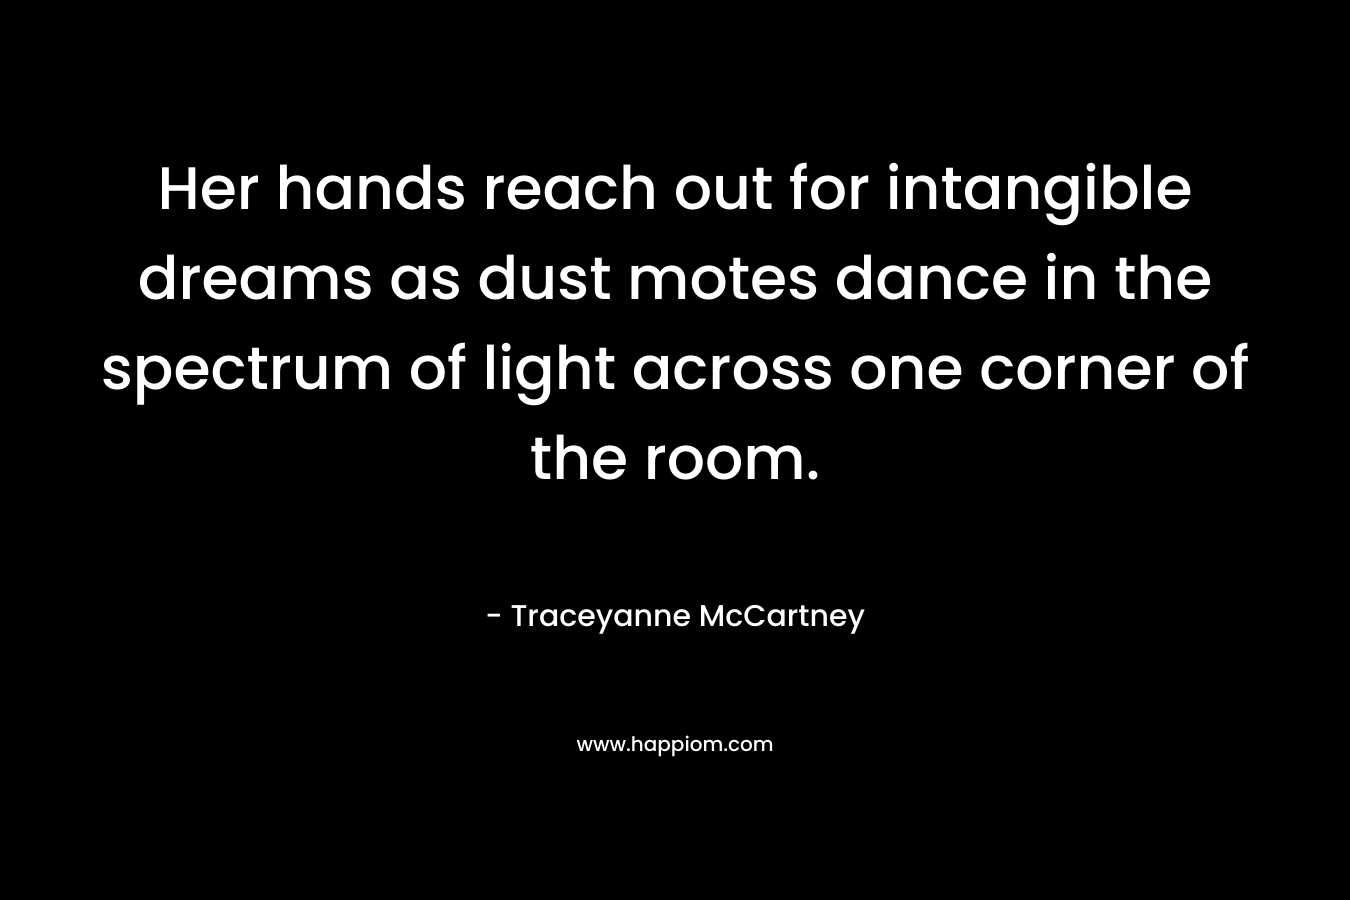 Her hands reach out for intangible dreams as dust motes dance in the spectrum of light across one corner of the room. – Traceyanne McCartney